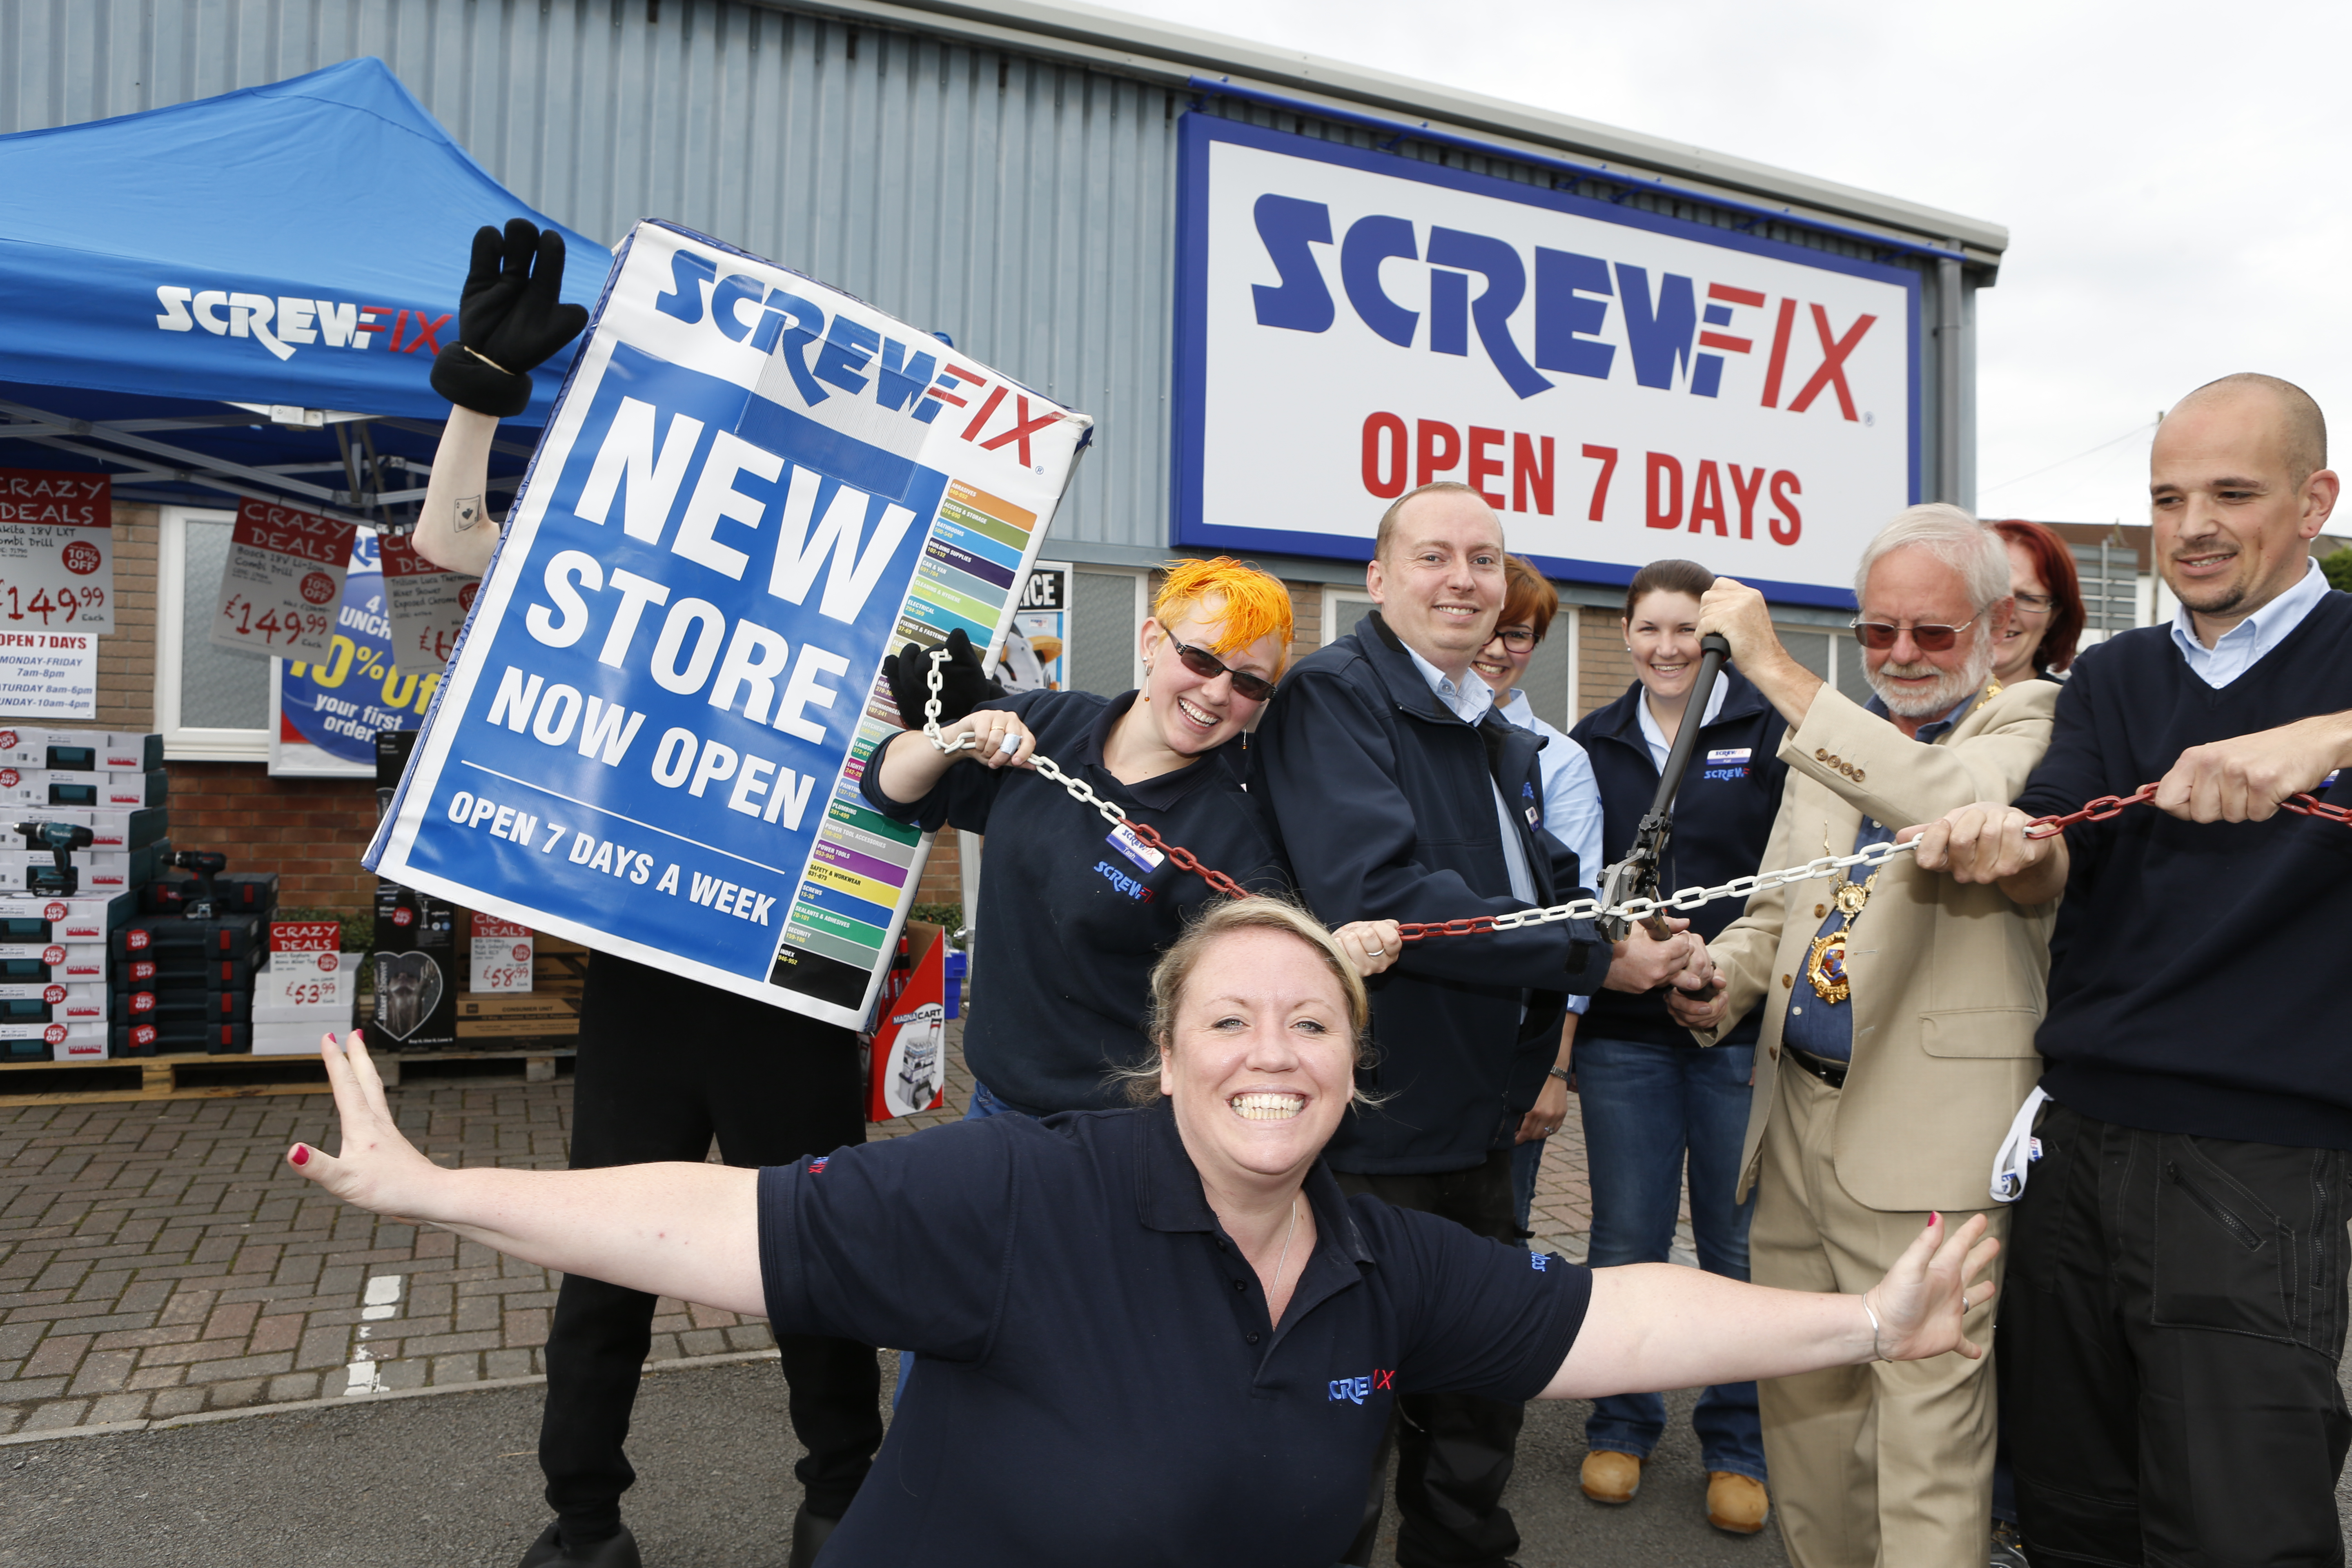 Two new Screwfix stores in South Wales declared as runaway successes